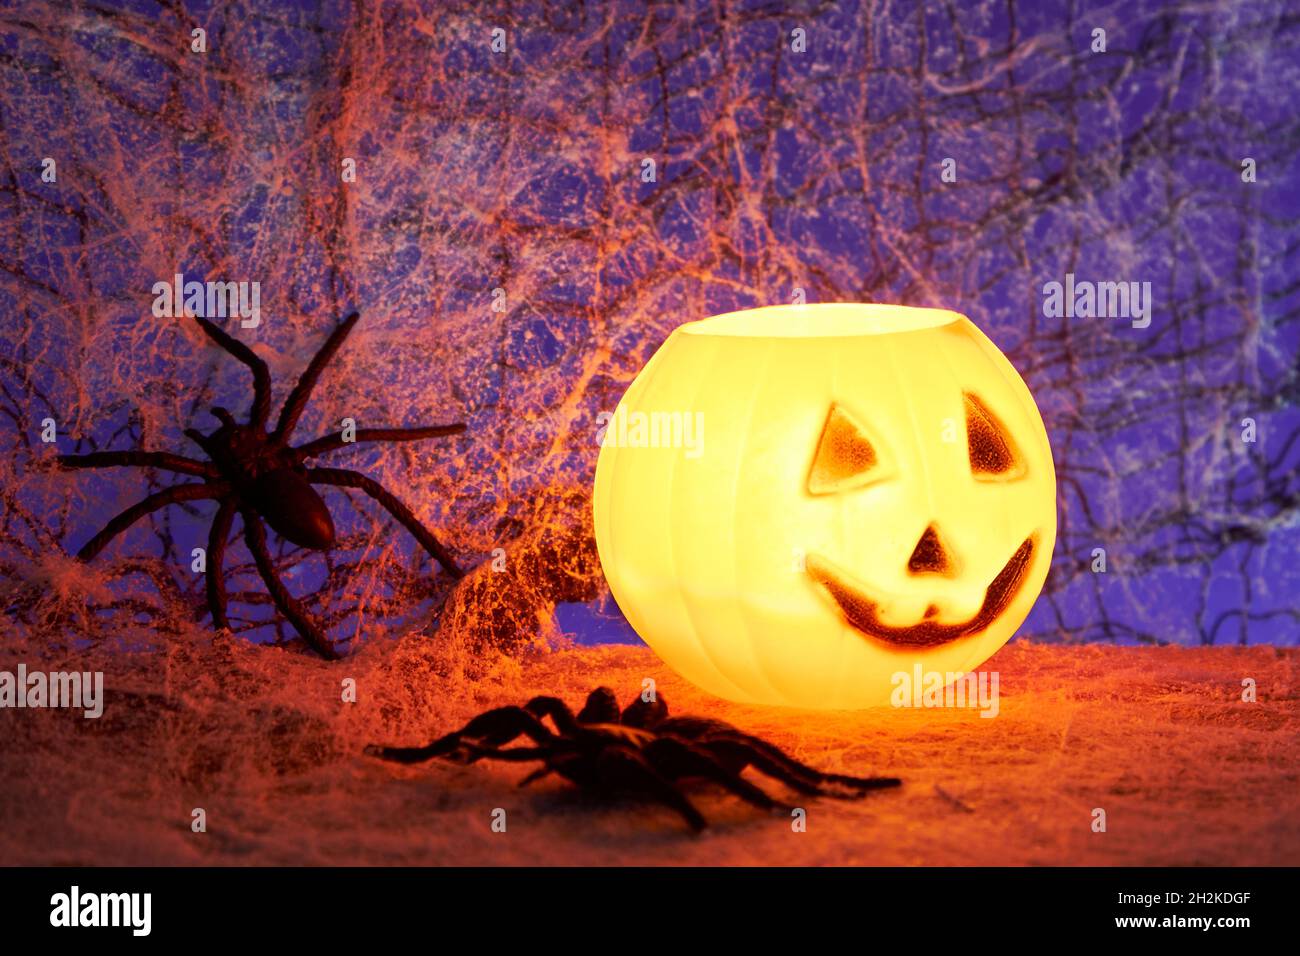 Halloween concept with a orange glowing pumpkin shape tealight candle holder and toy spiders on a dark cobweb background Stock Photo